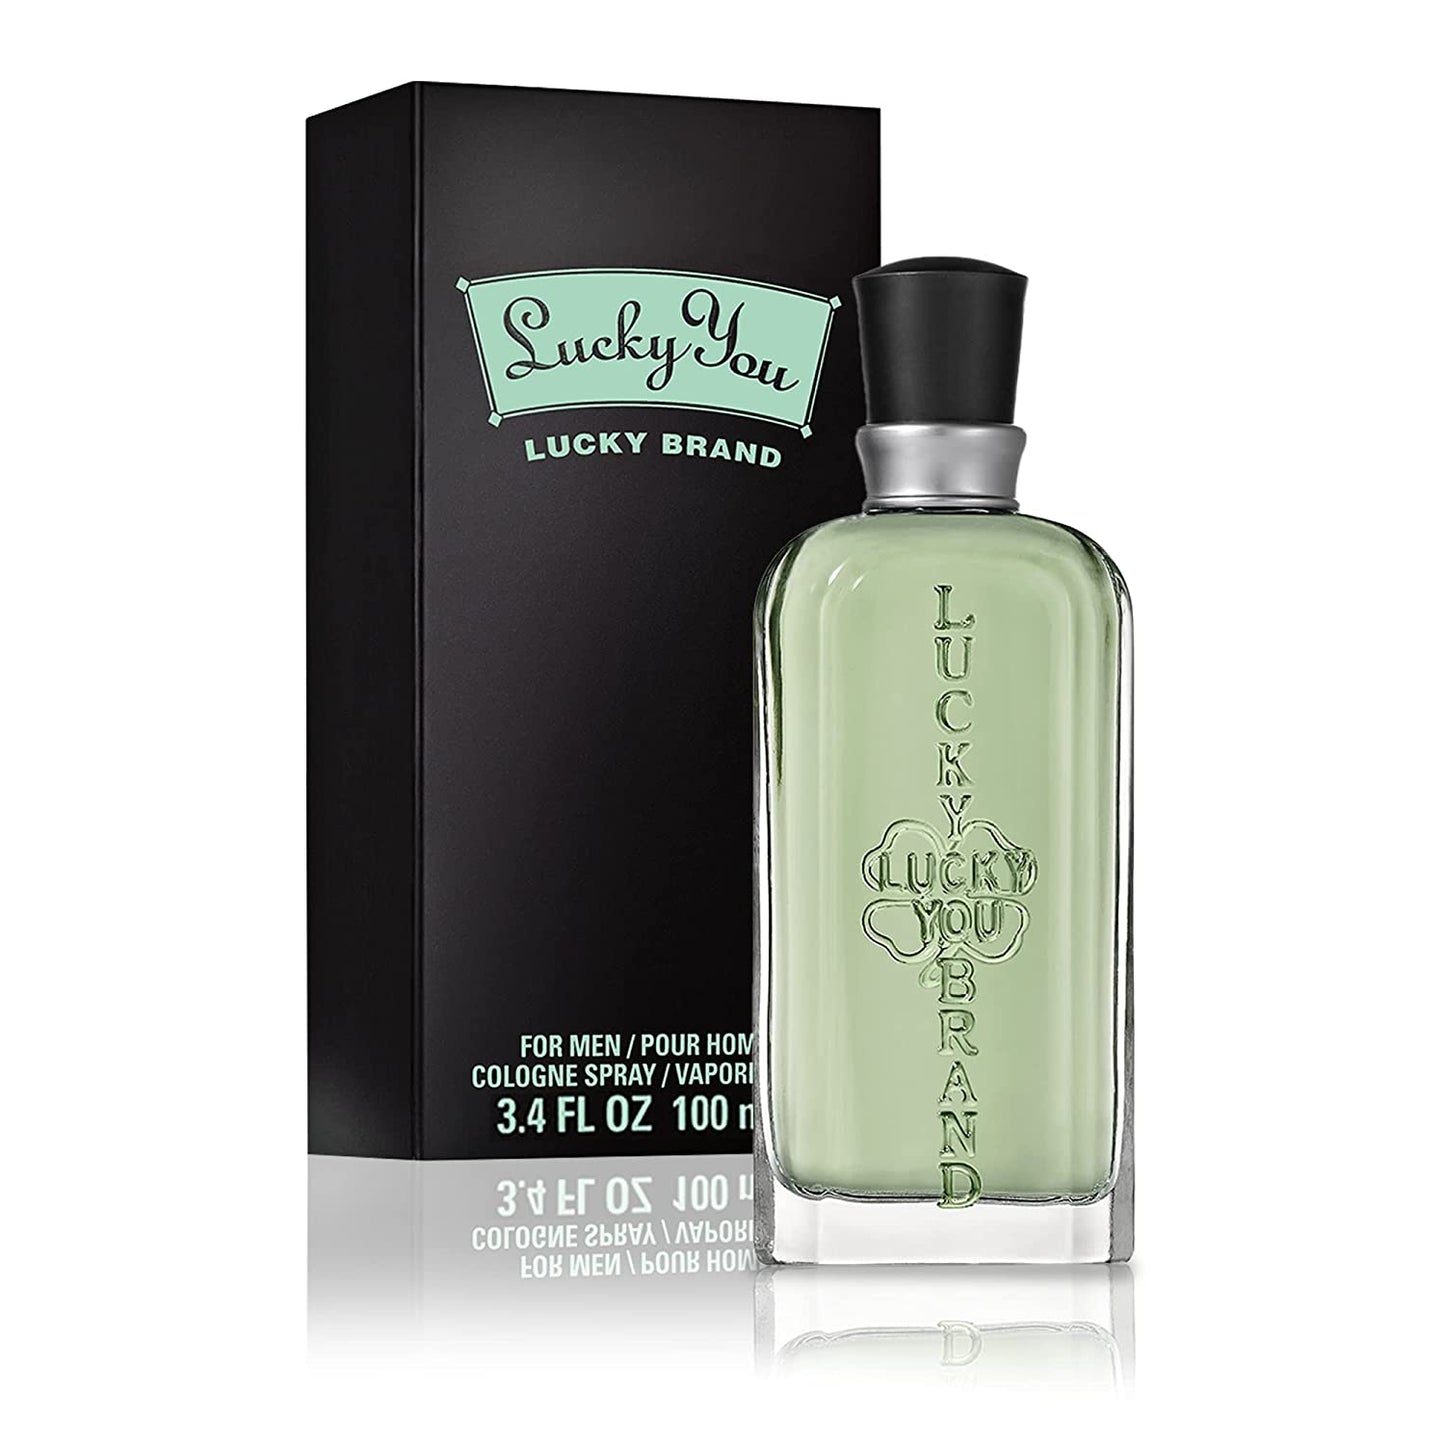 Lucky You Men's Cologne Fragrance Spray, Day or Night Casual Scent with Bamboo Stem Fragrance Notes, 3.4 Fl Oz